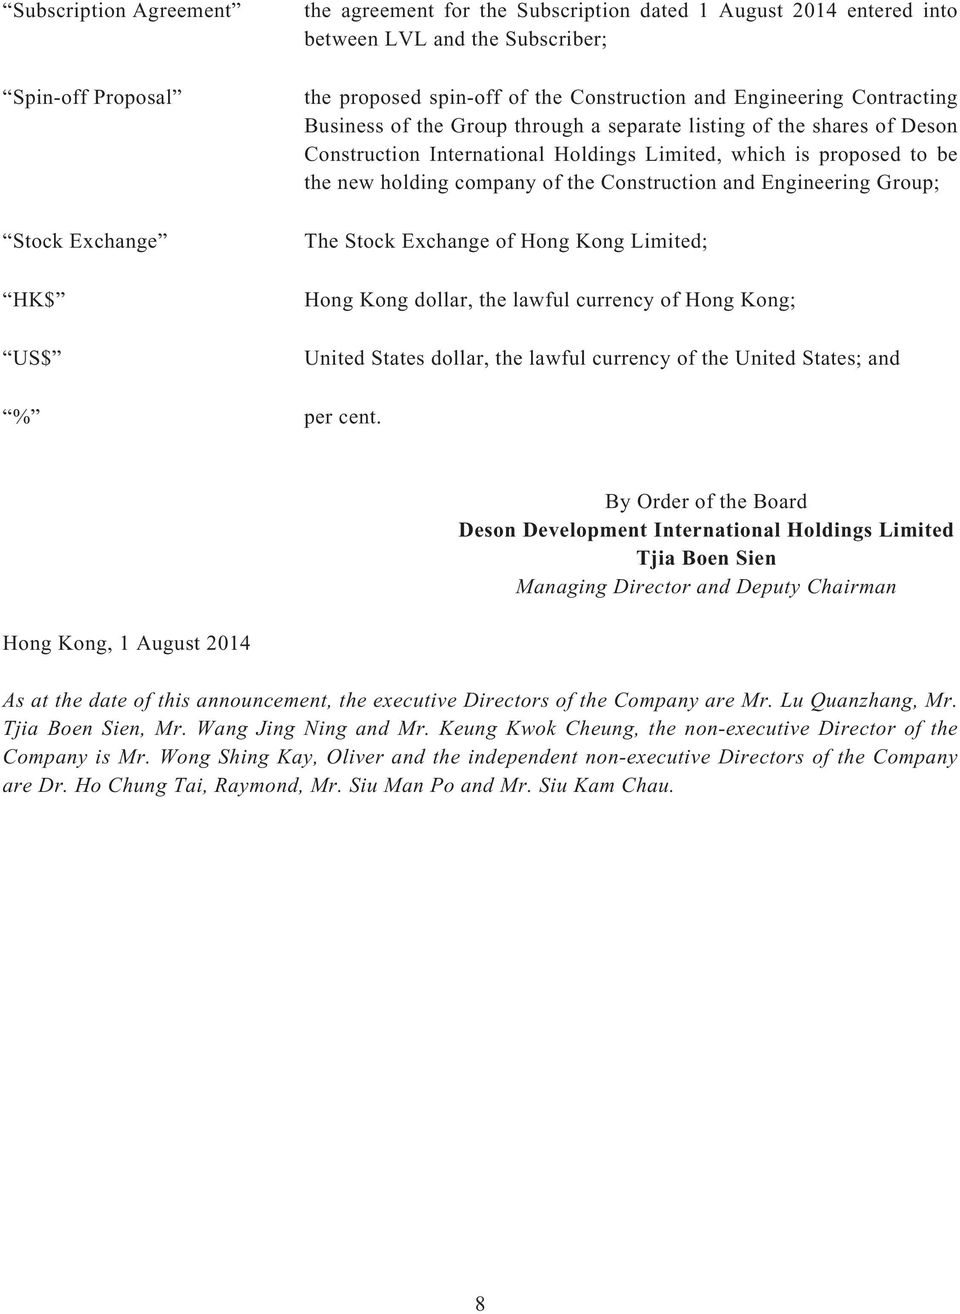 company of the Construction and Engineering Group; The Stock Exchange of Hong Kong Limited; Hong Kong dollar, the lawful currency of Hong Kong; United States dollar, the lawful currency of the United